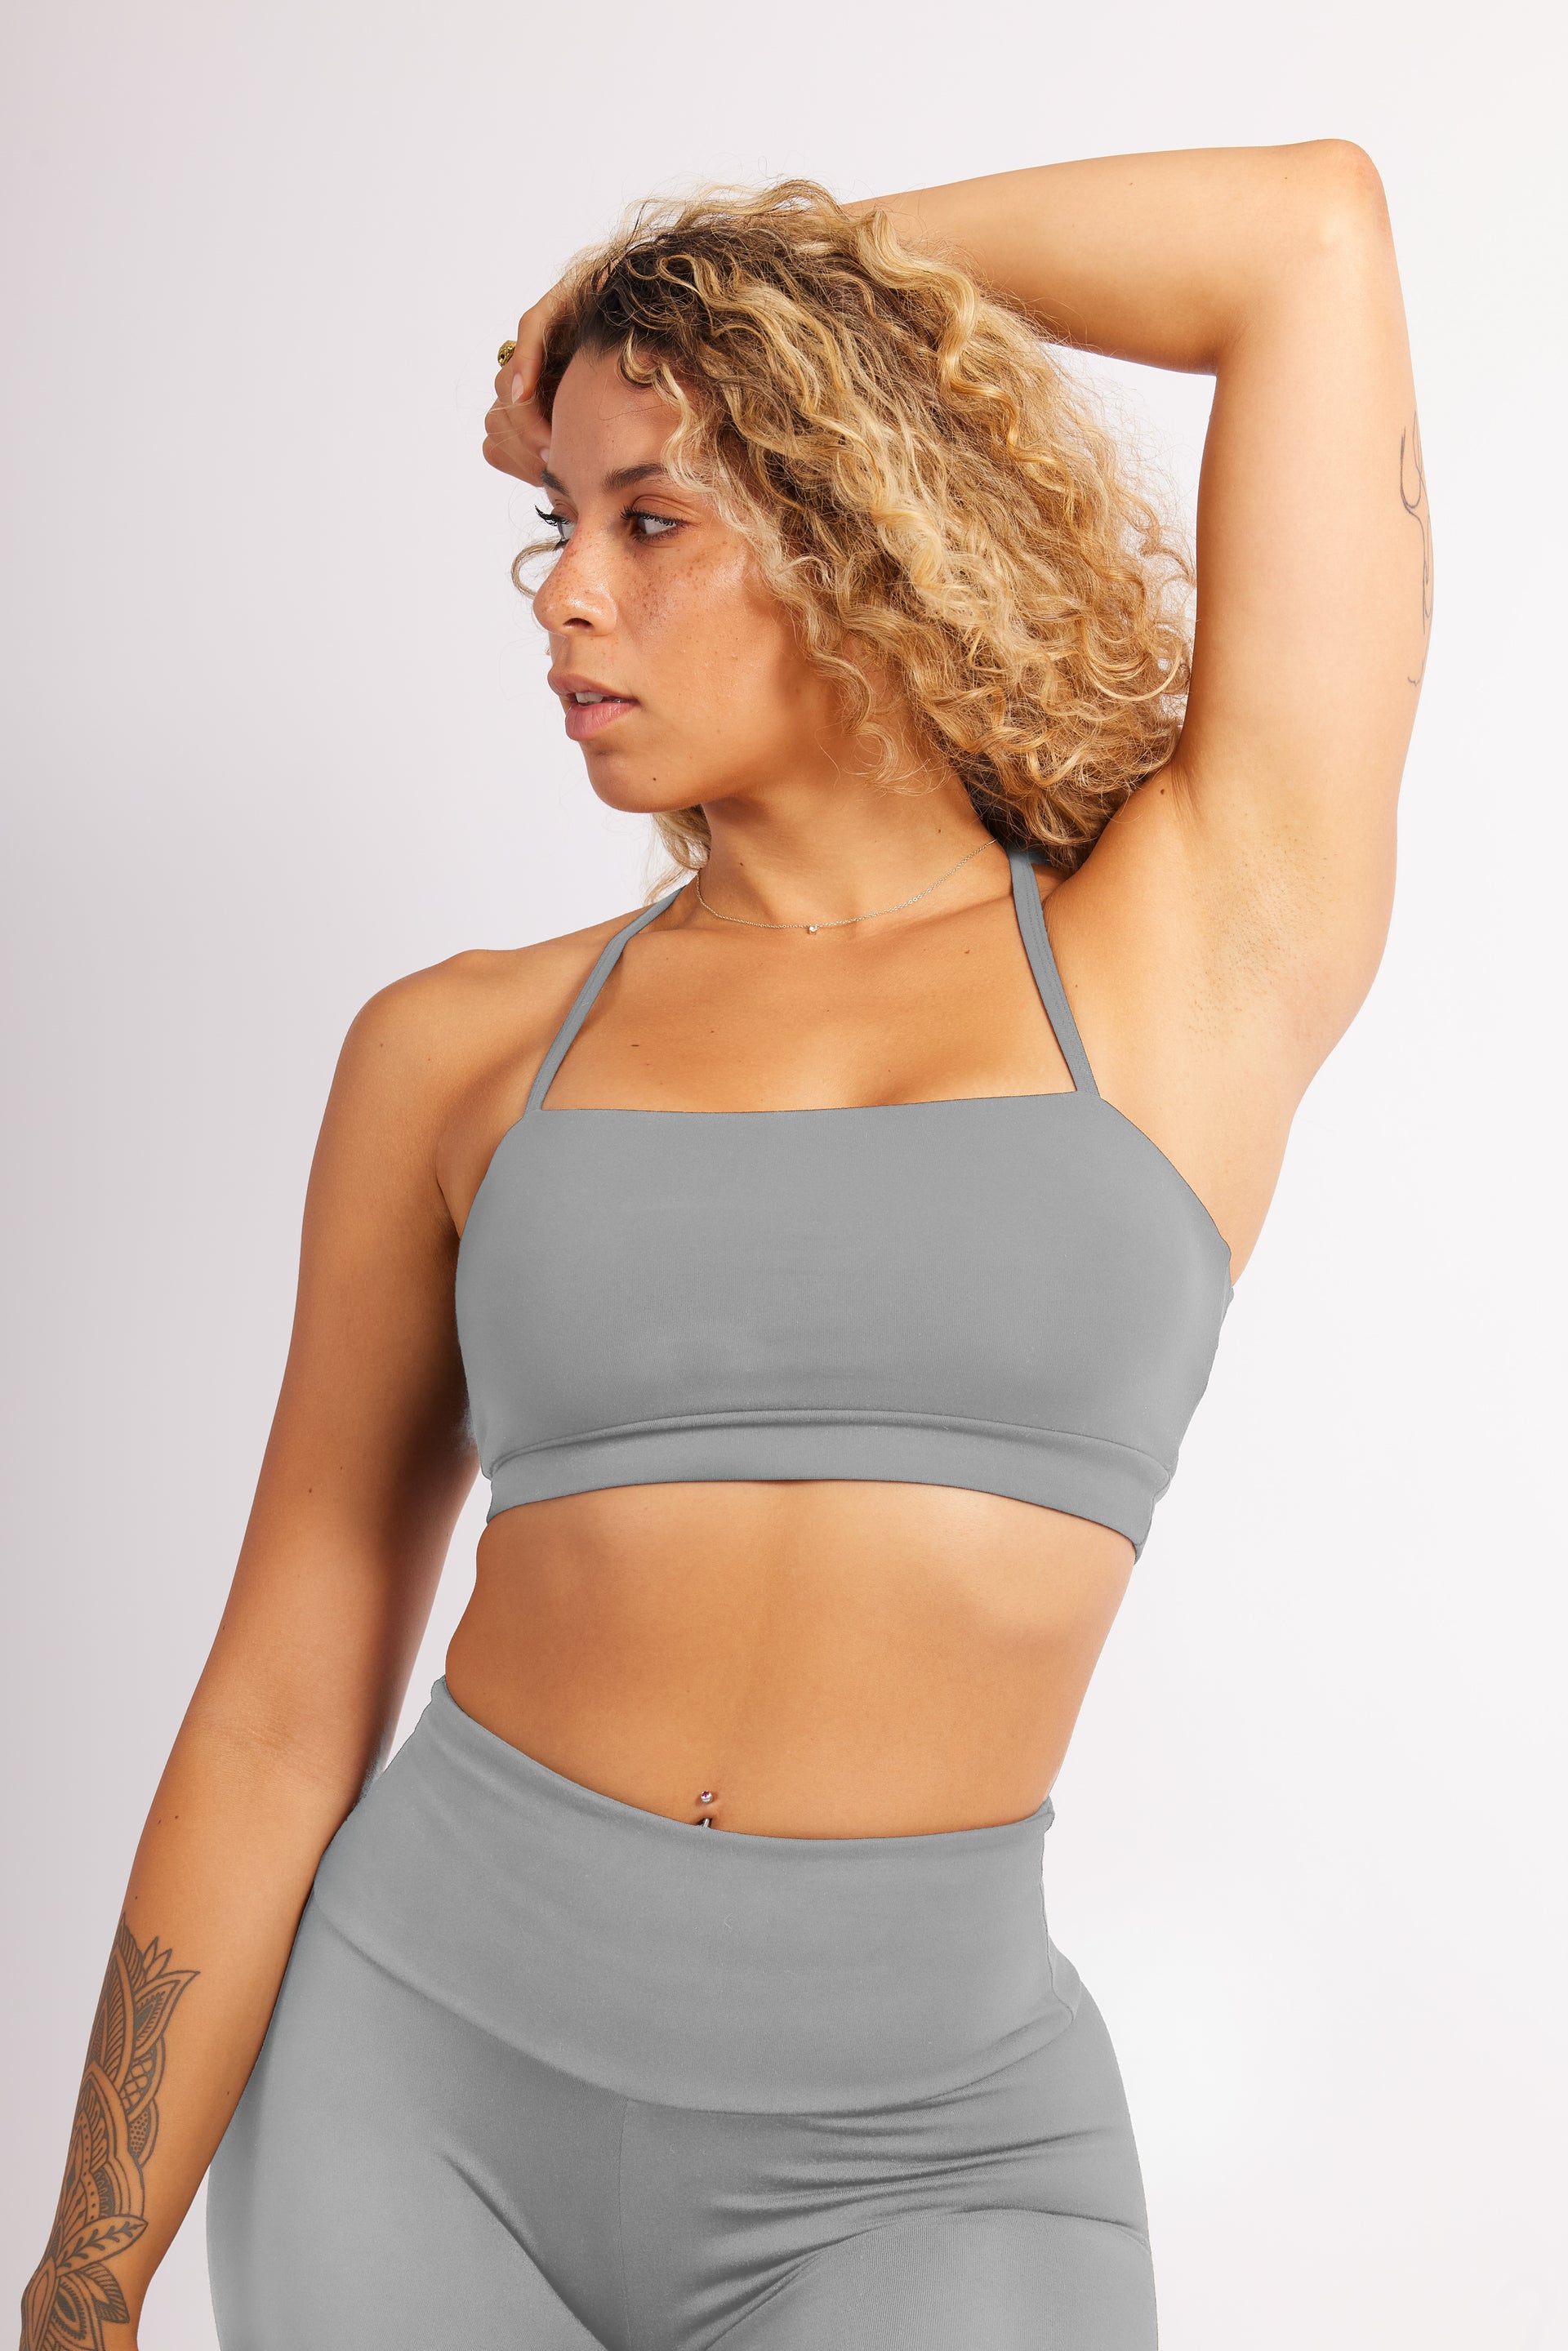 Women's Strappy Flattering Crop Tops For Bigger Busts